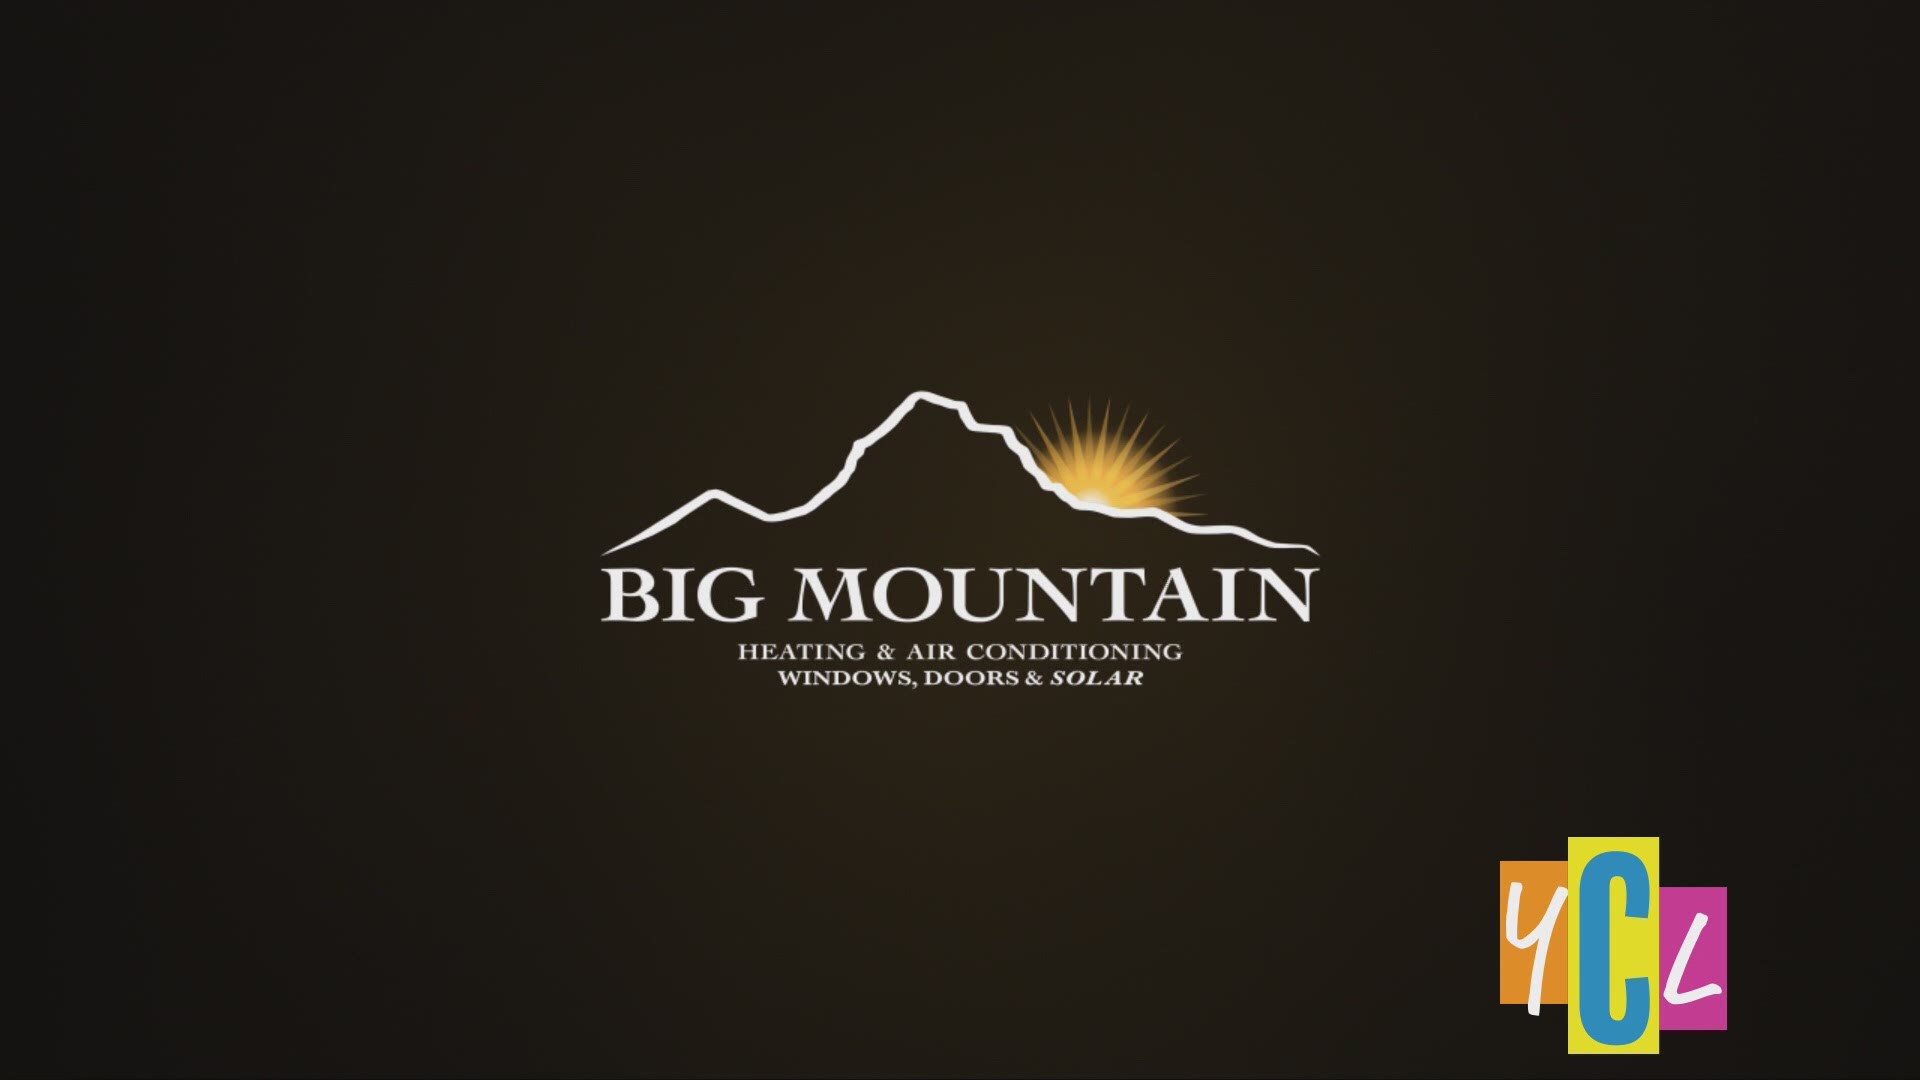 Big Mountain Heating & Air explains how to best take care of our HVAC units and how they can help. This segment was paid for by Big Mountain Heating & Air.